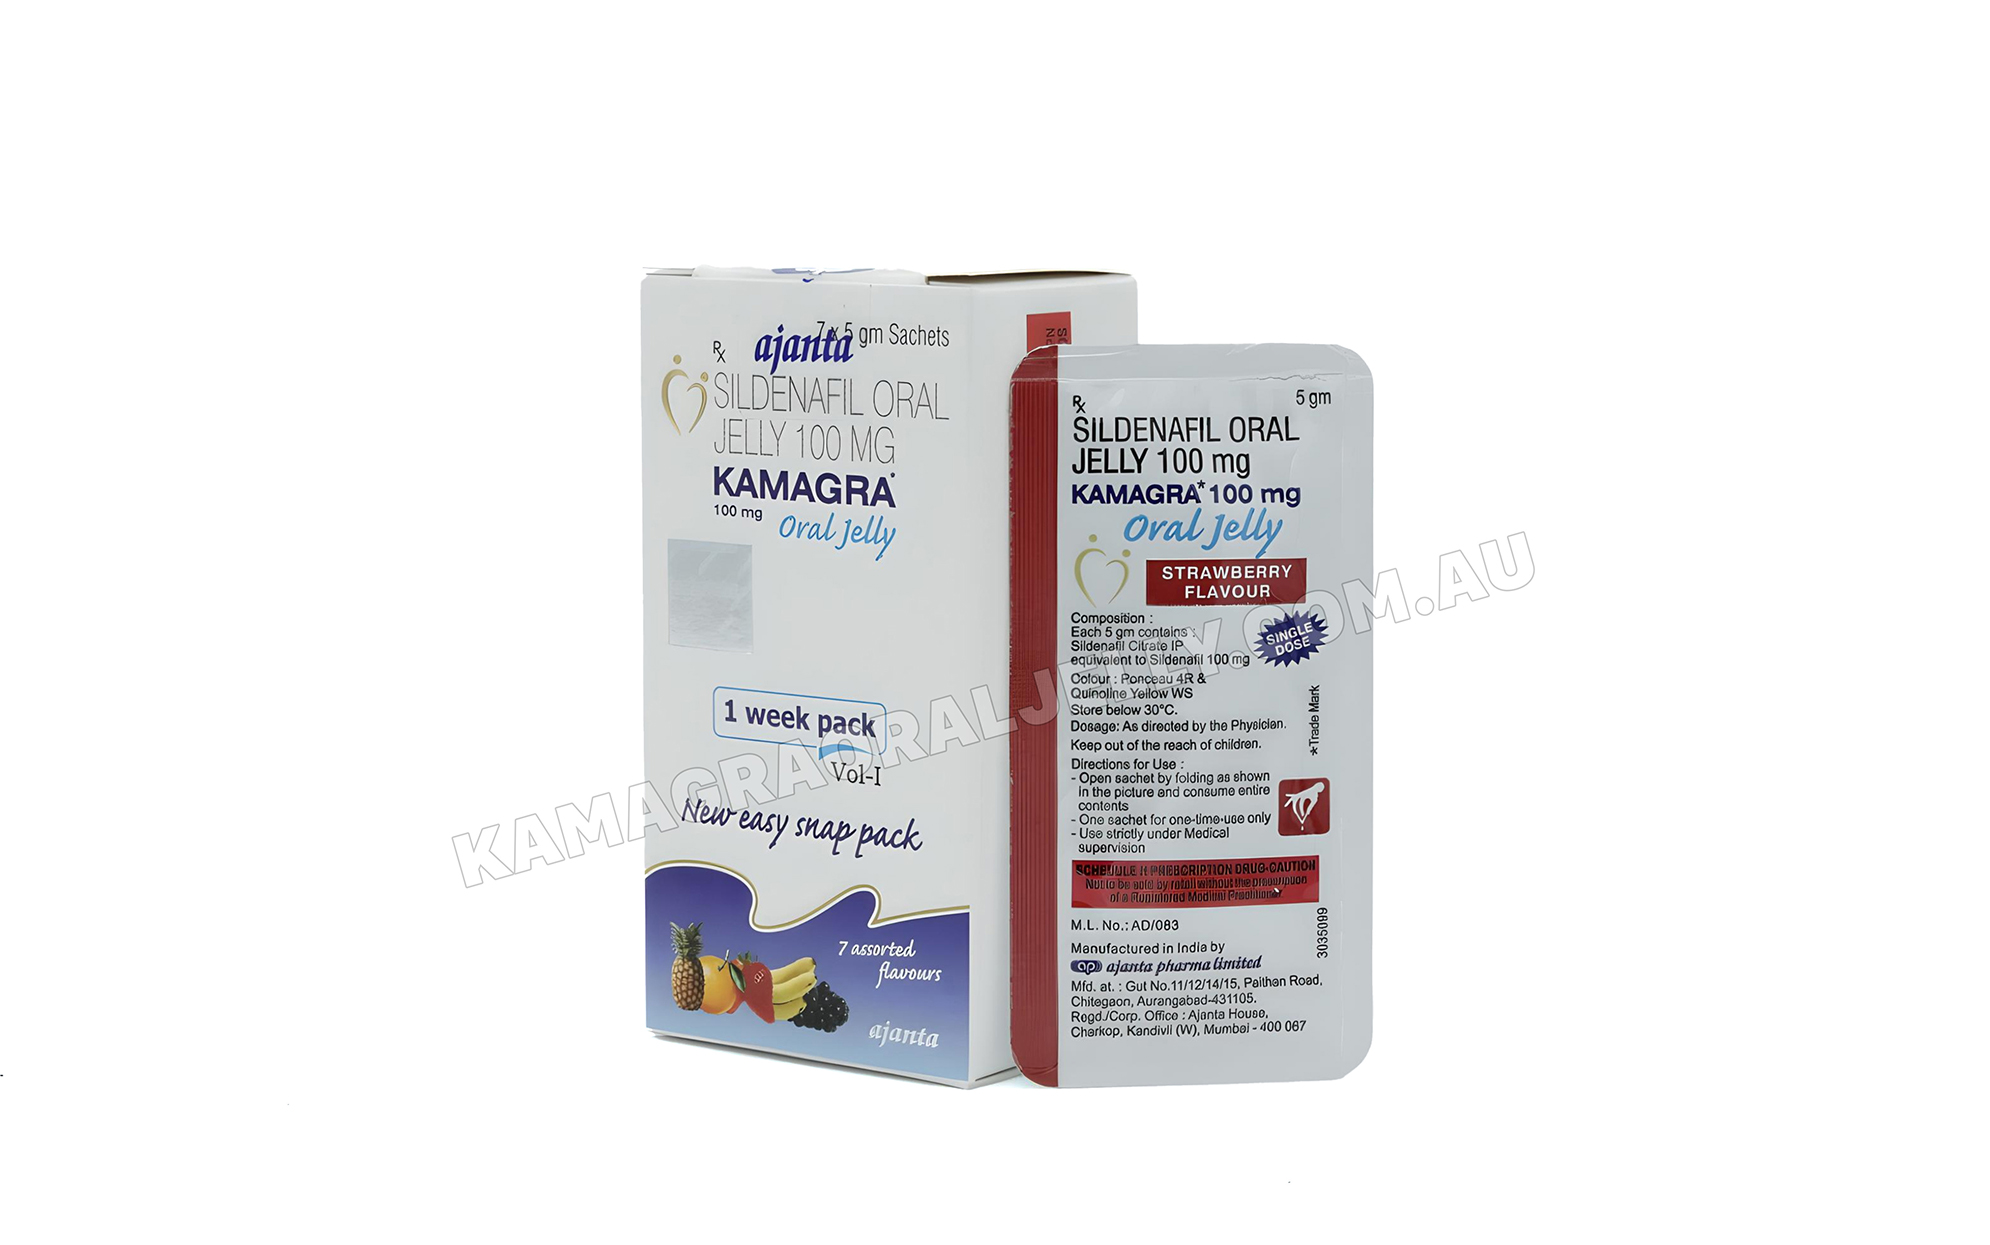 Why choose Kamagra Oral Jelly over other alternatives?